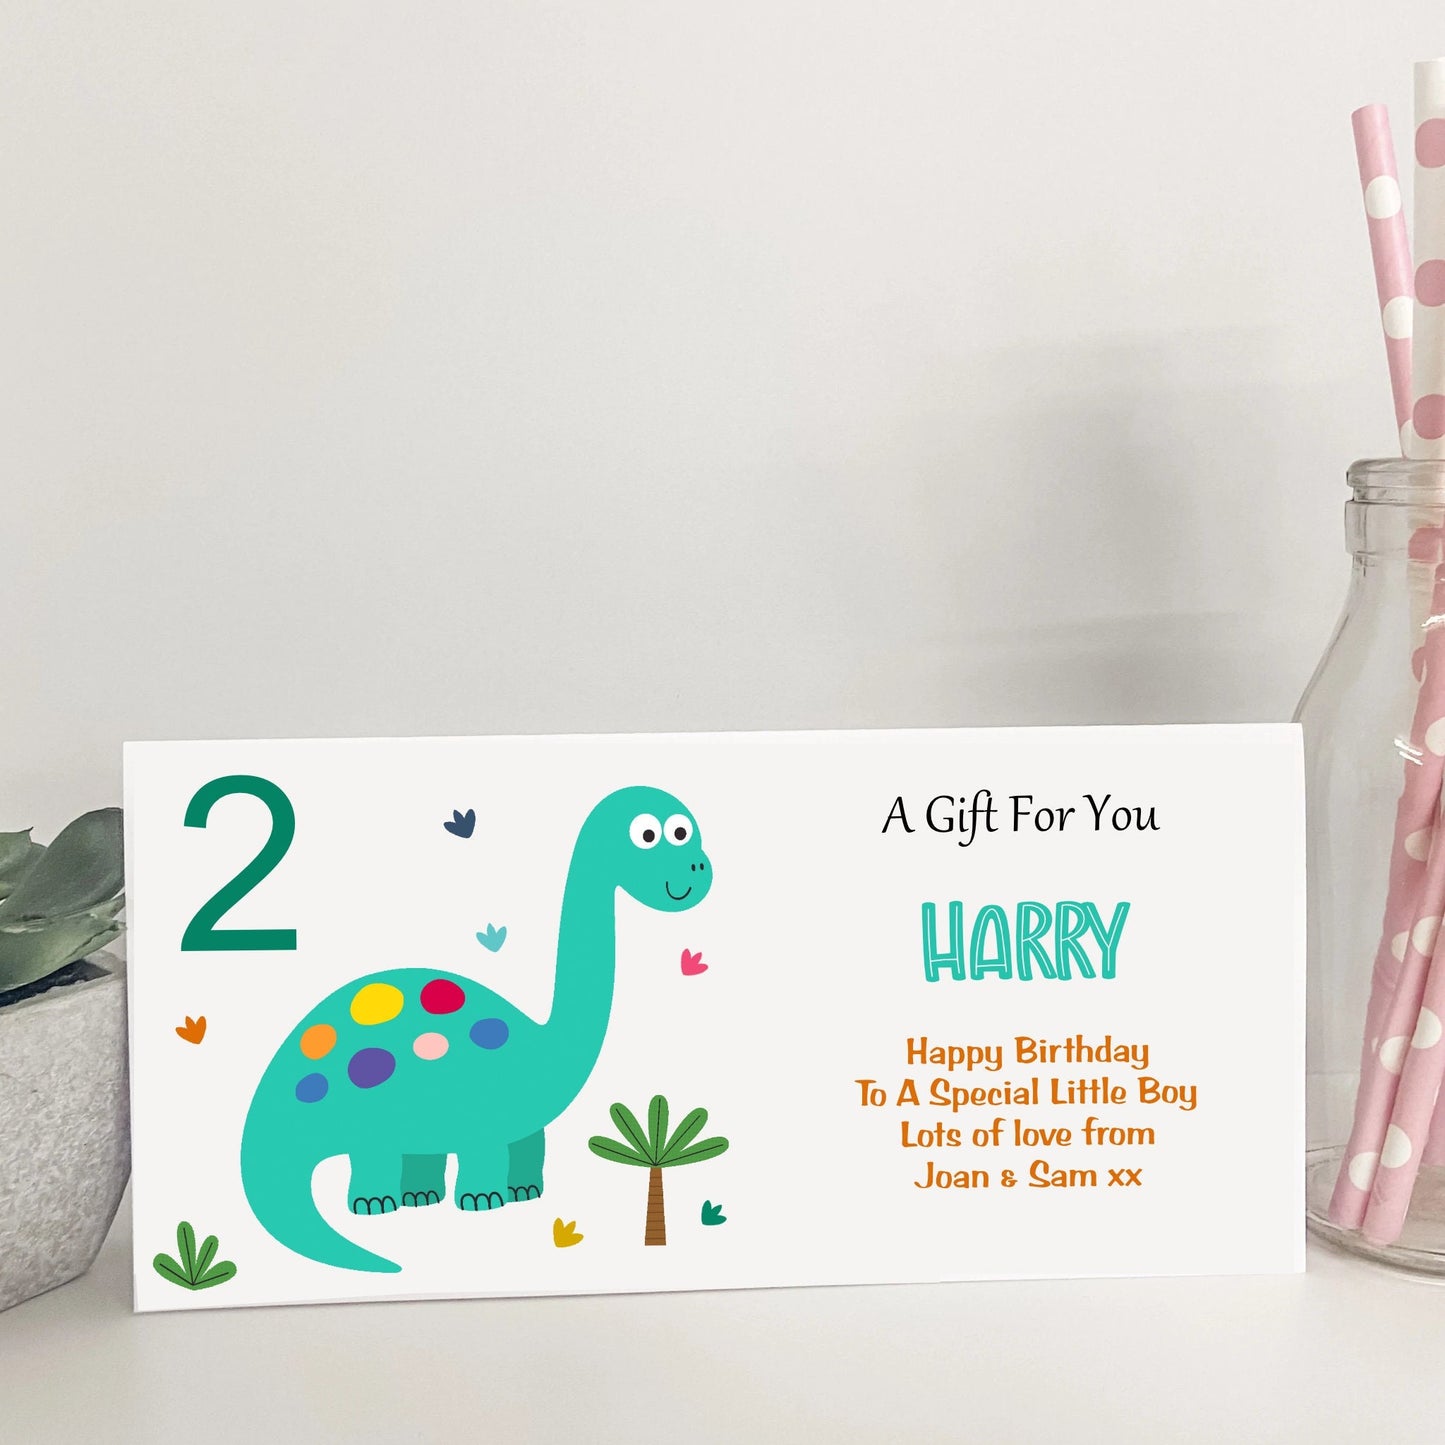 Personalised Dinosaur Gift Card Money Wallet Voucher Gift Vouchers A Gift For You Son Daughter Grandson Nephew Cousin Any Age